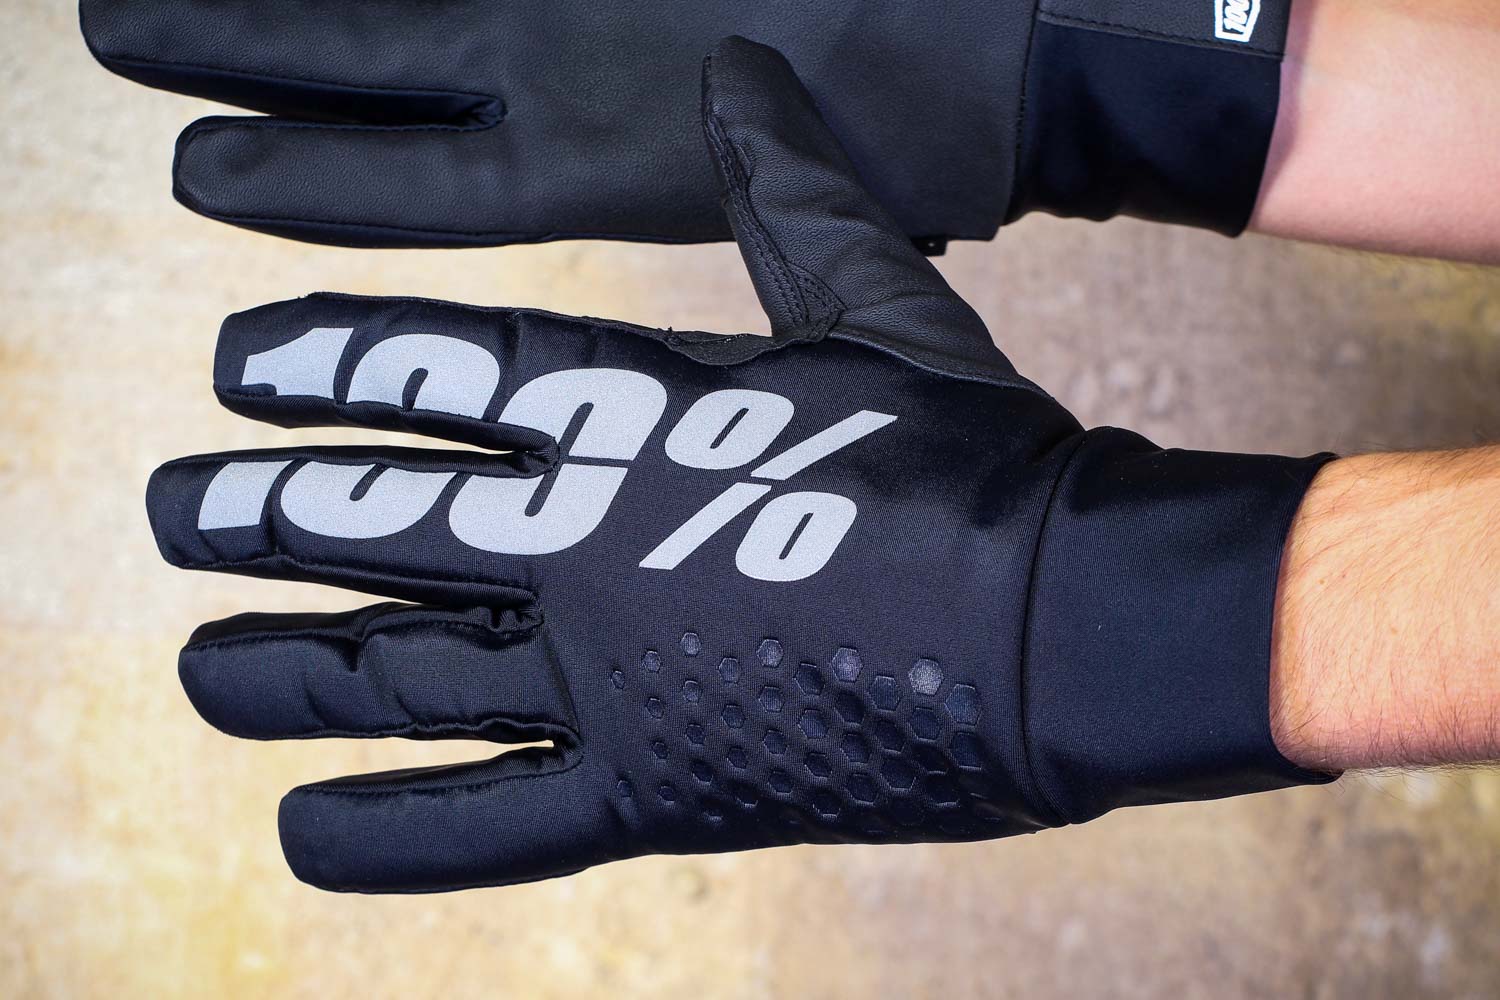 100 percent cycling gloves